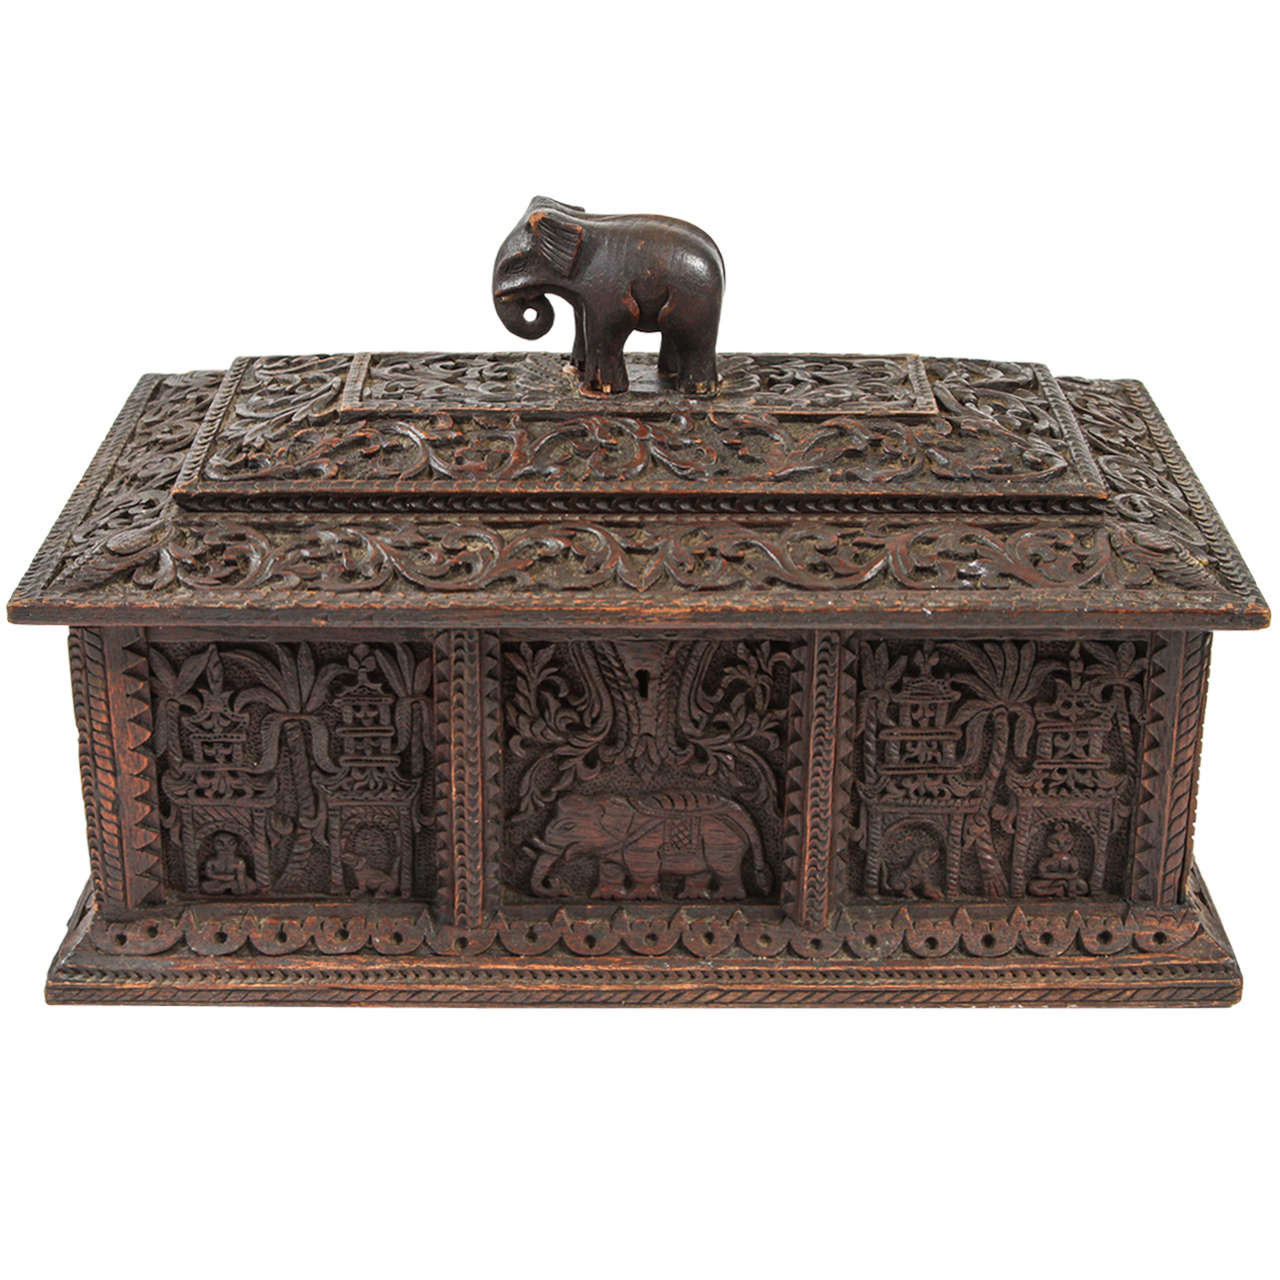 Antique Carved Wood Box